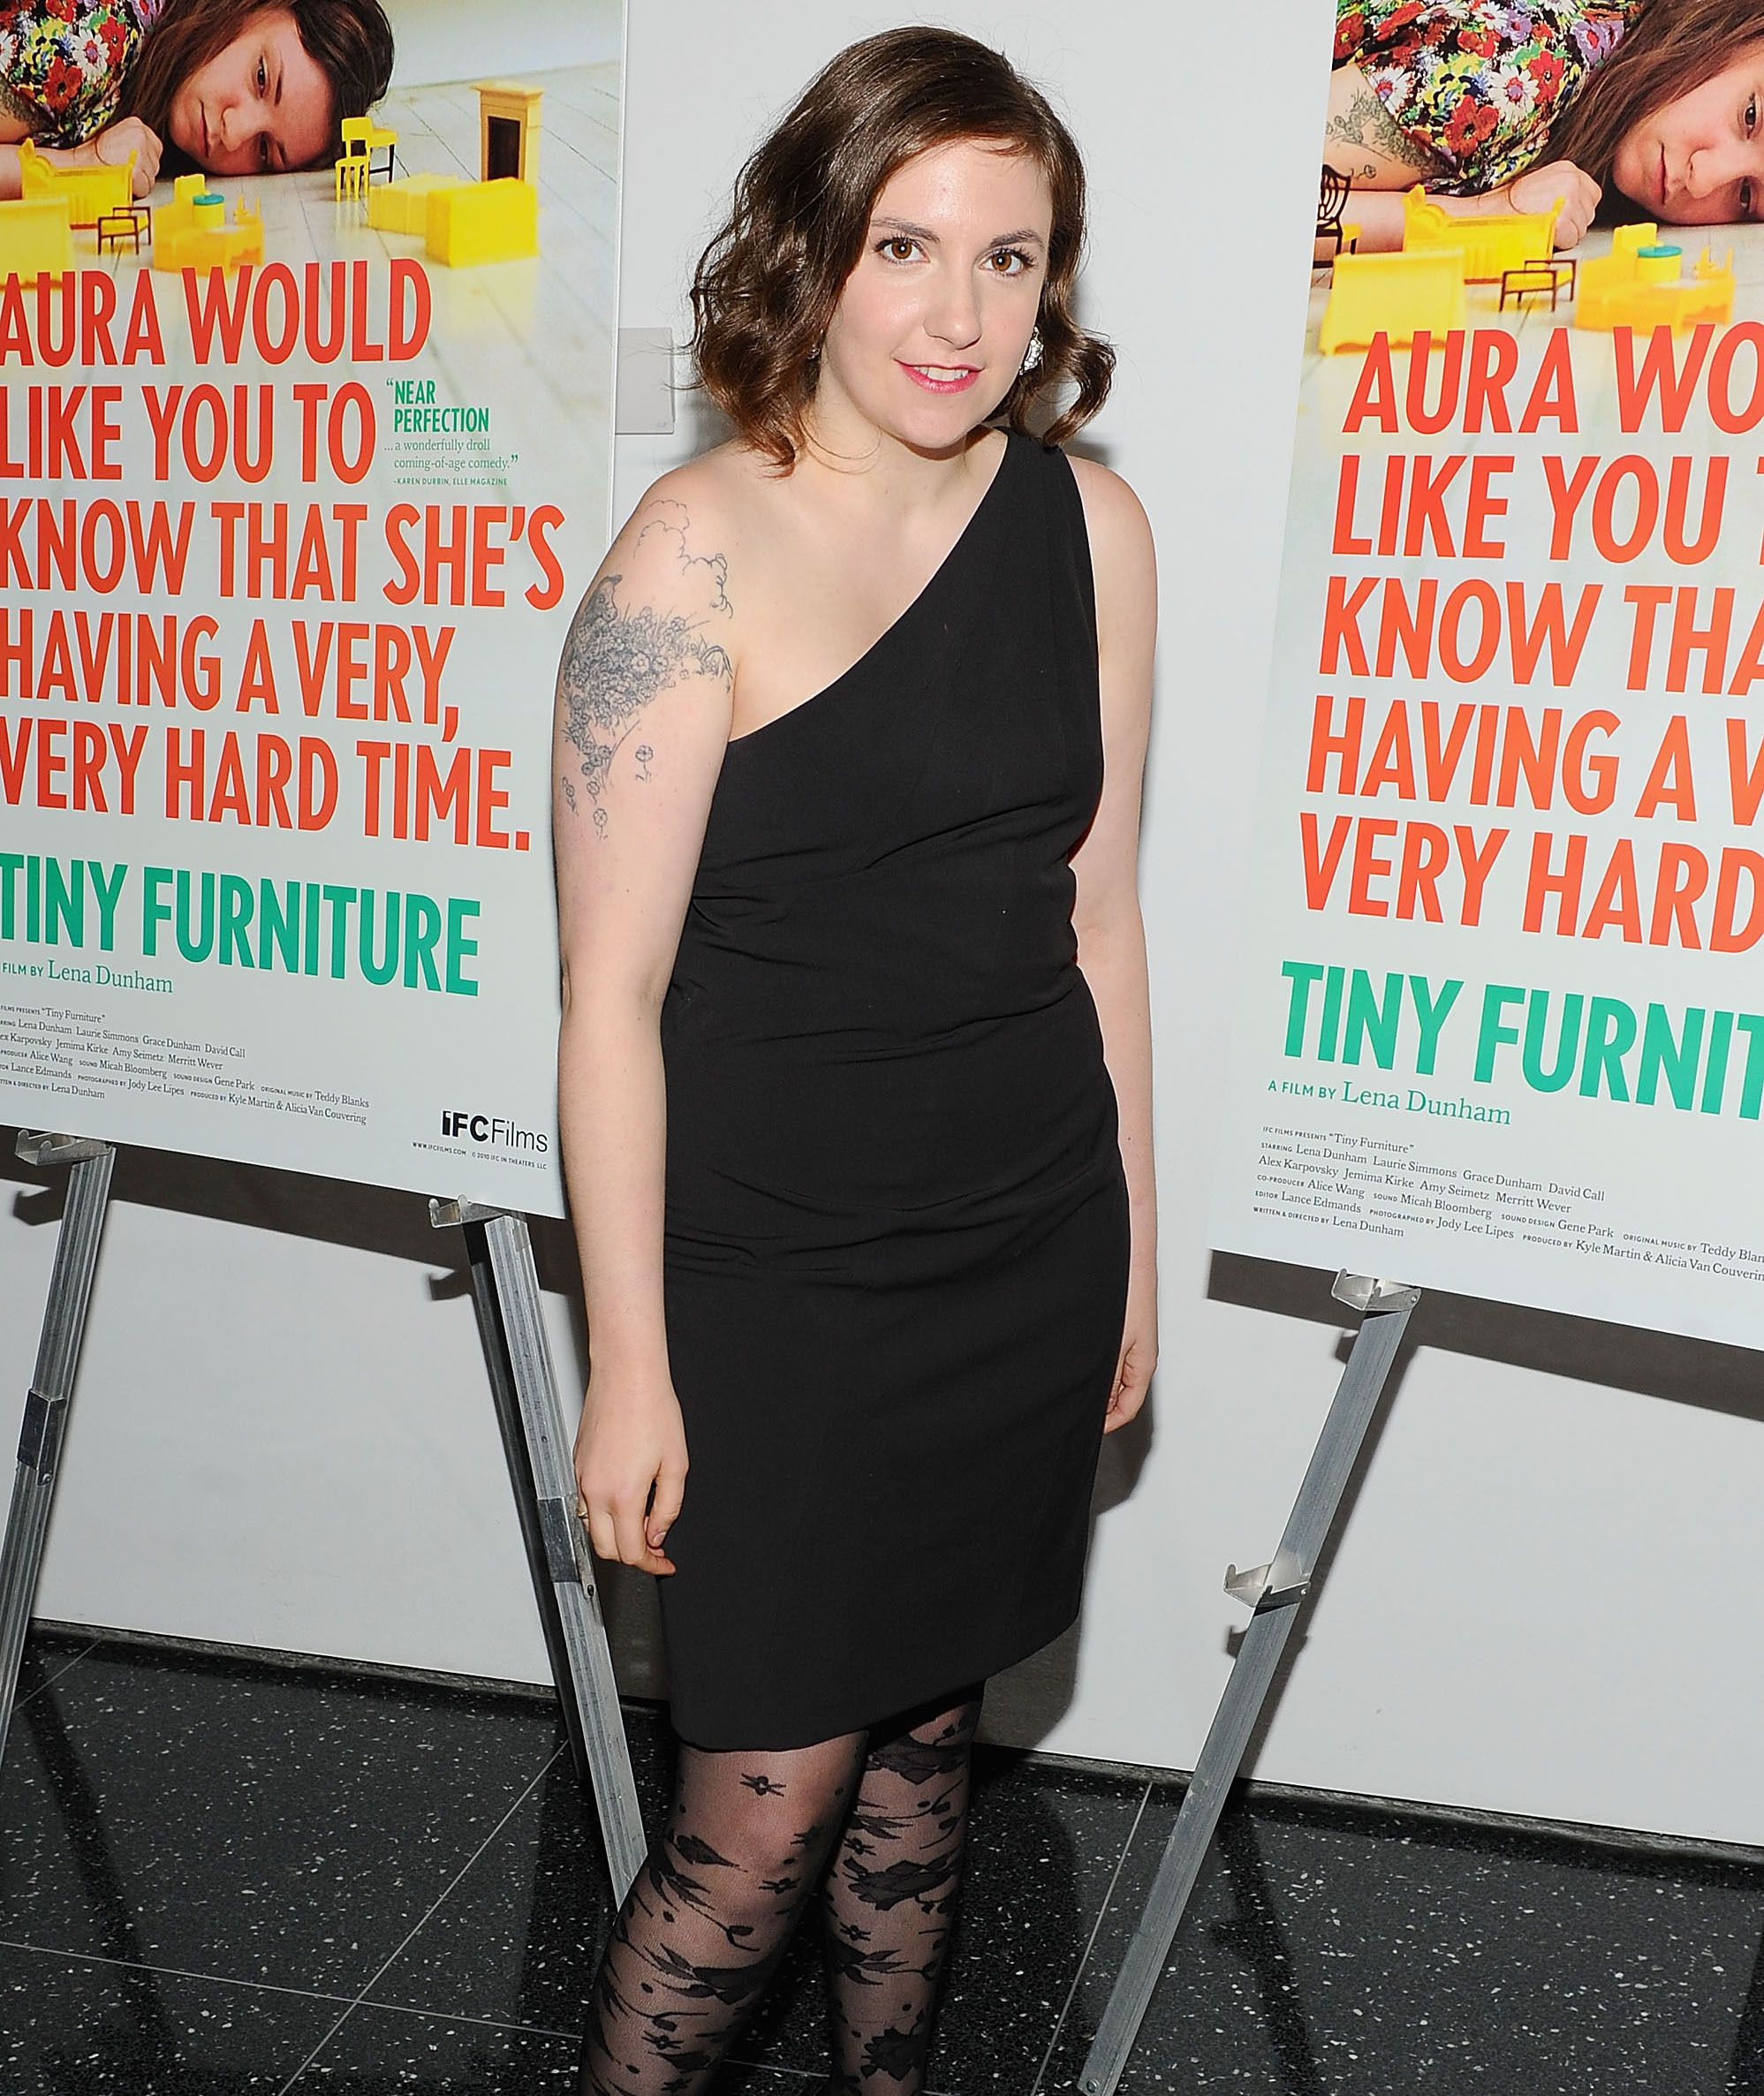 Beach Babes Nudist Collection - Lena Dunham Flaunts Weight Loss in Nude Photo While Talking Body Image